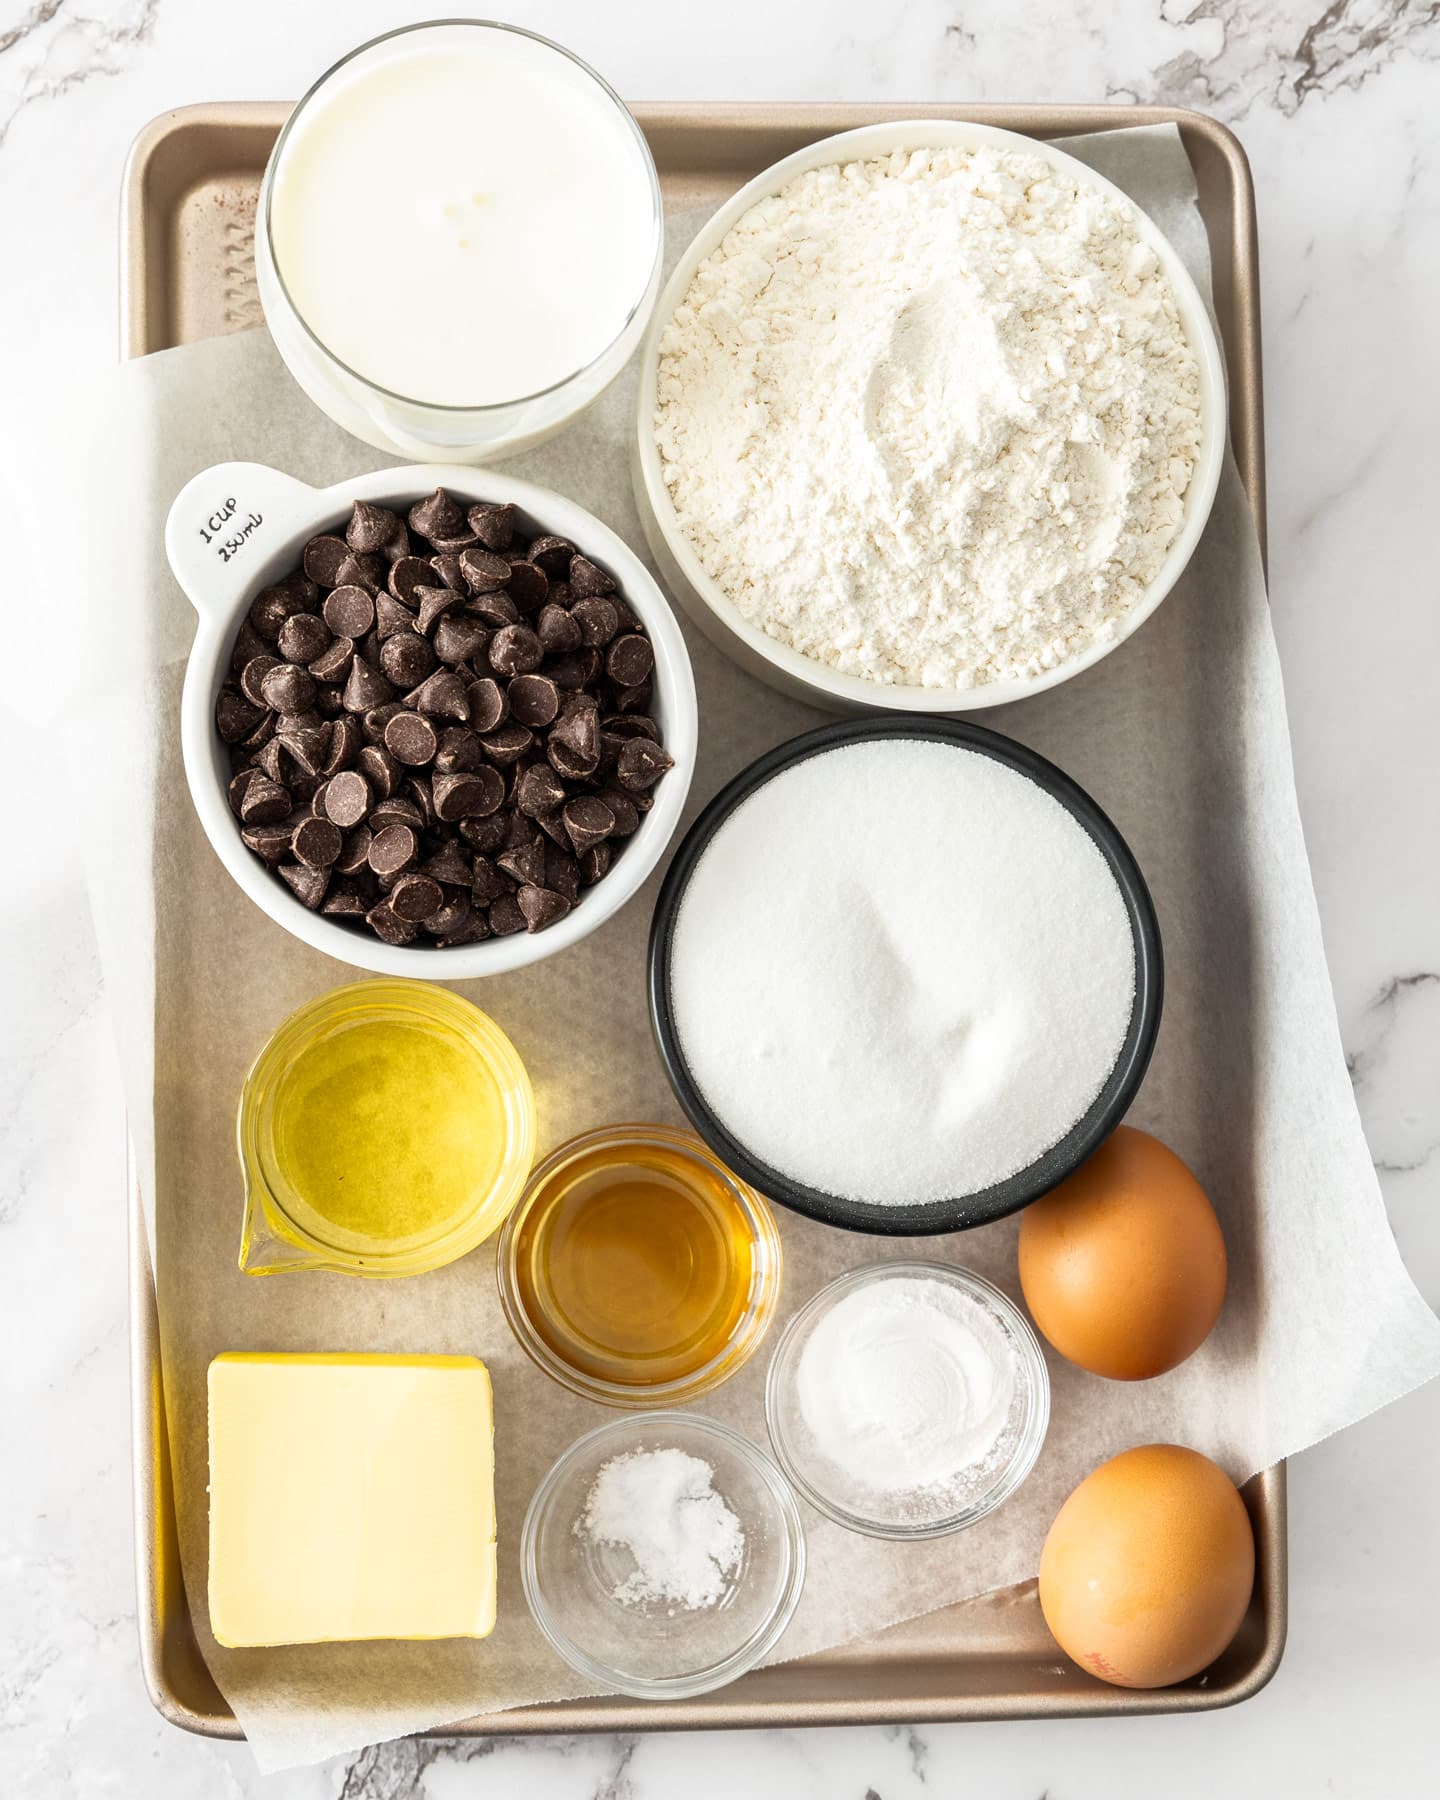 Ingredients for chocolate chip loaf cake on a baking tray.